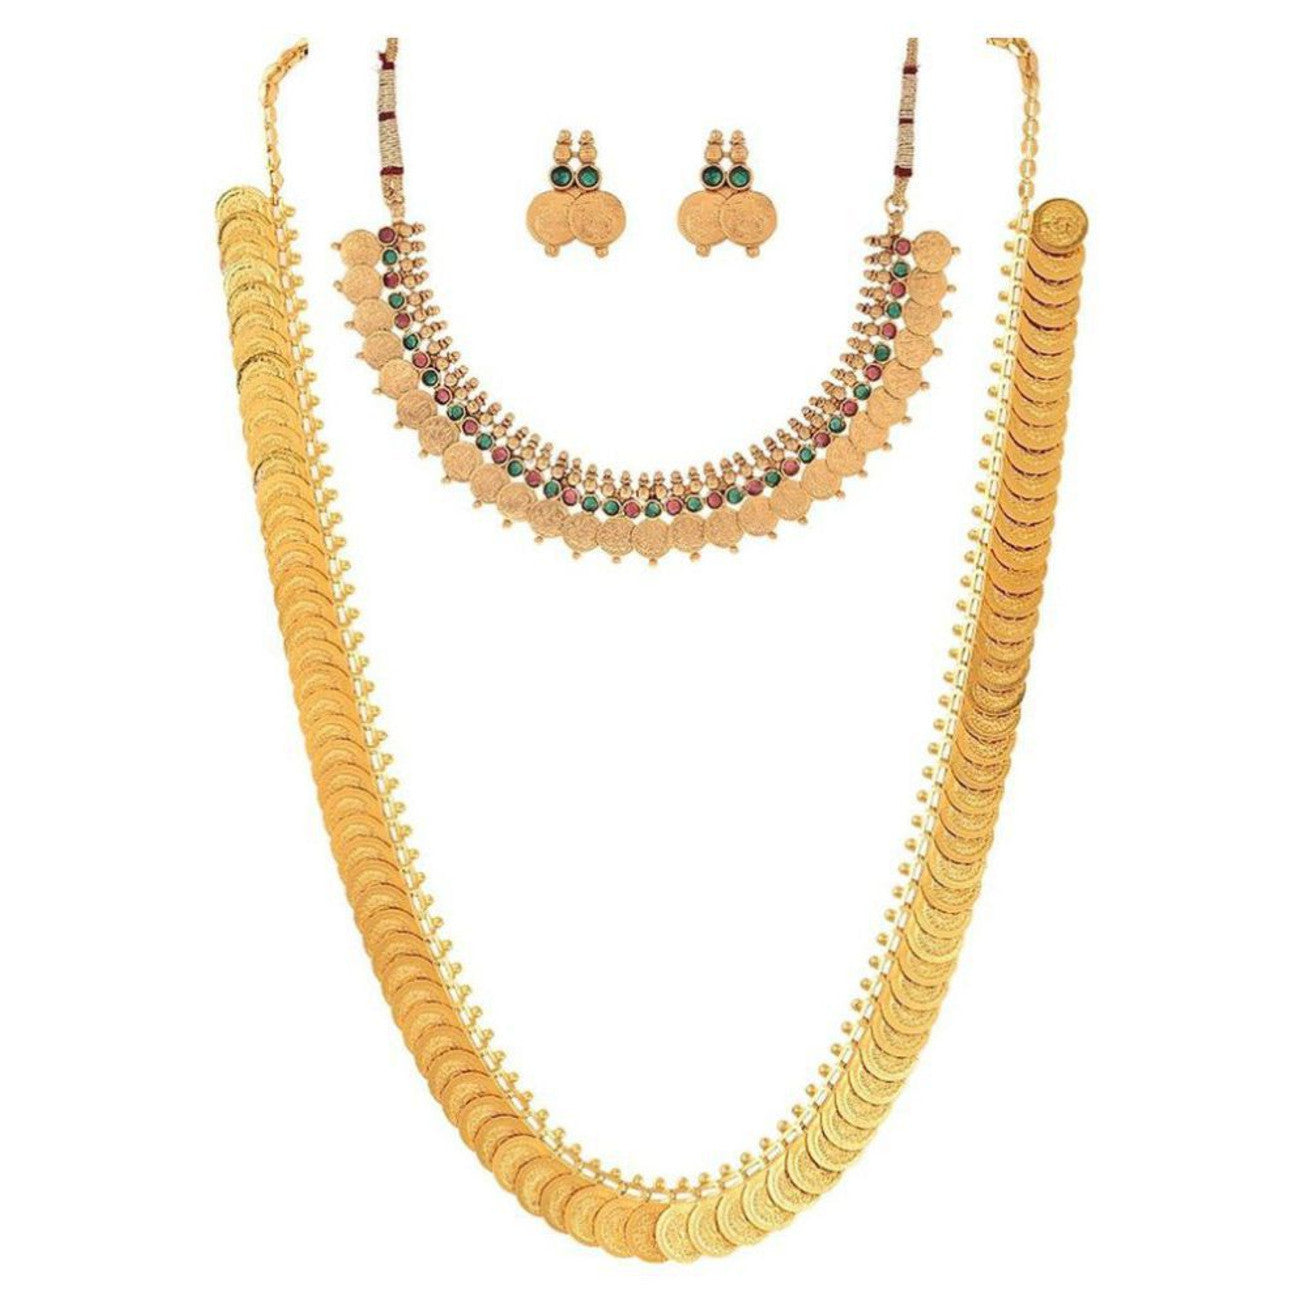 Best Gold Plated Traditional Handcrafted Designed by Mekkna of Necklace with Bangel for Women. Now We can Book This Jewellery set online from Mekkna.